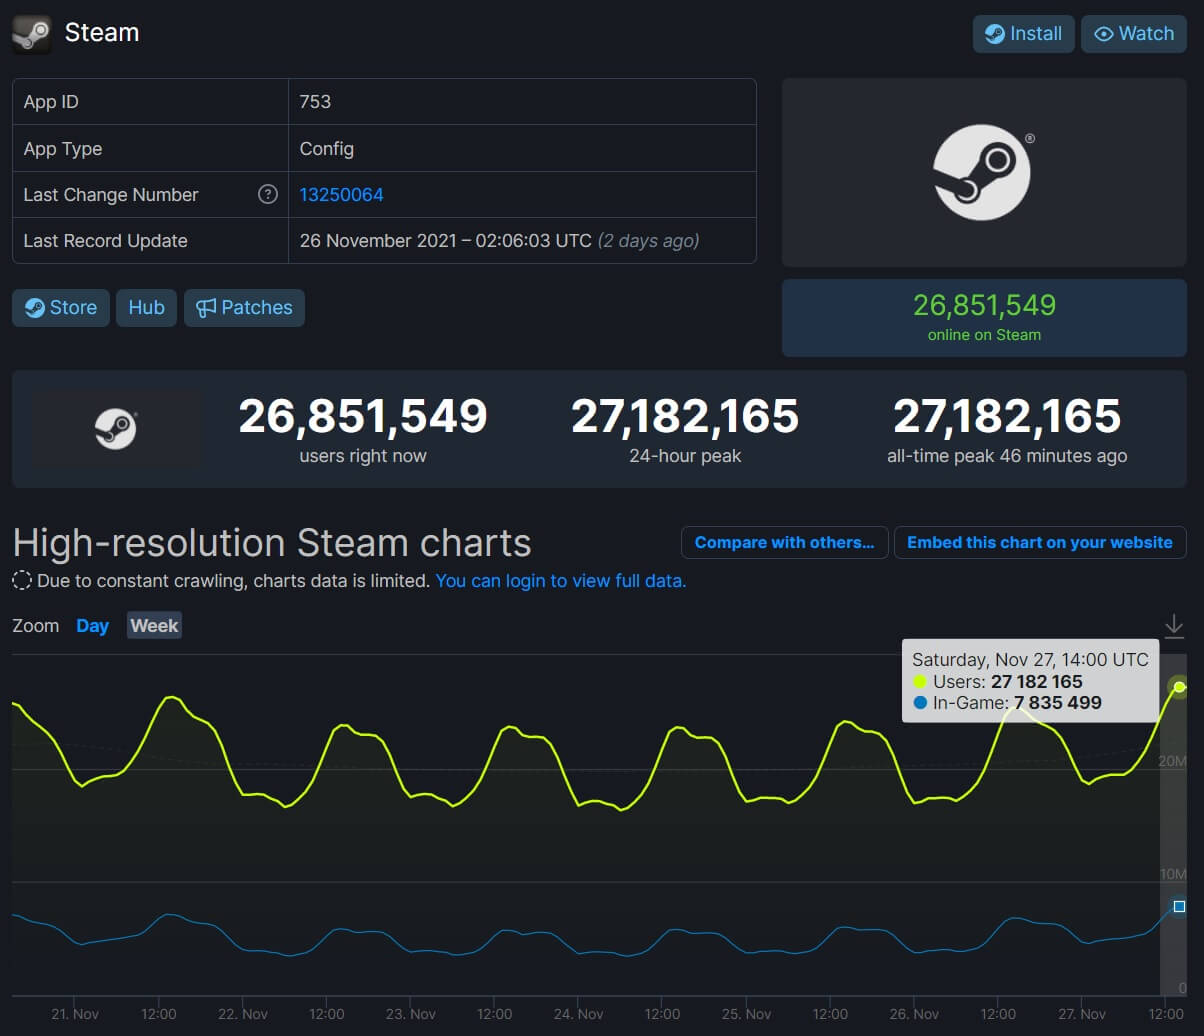 Steam Sets New Record With Over 27 Million Concurrent Players